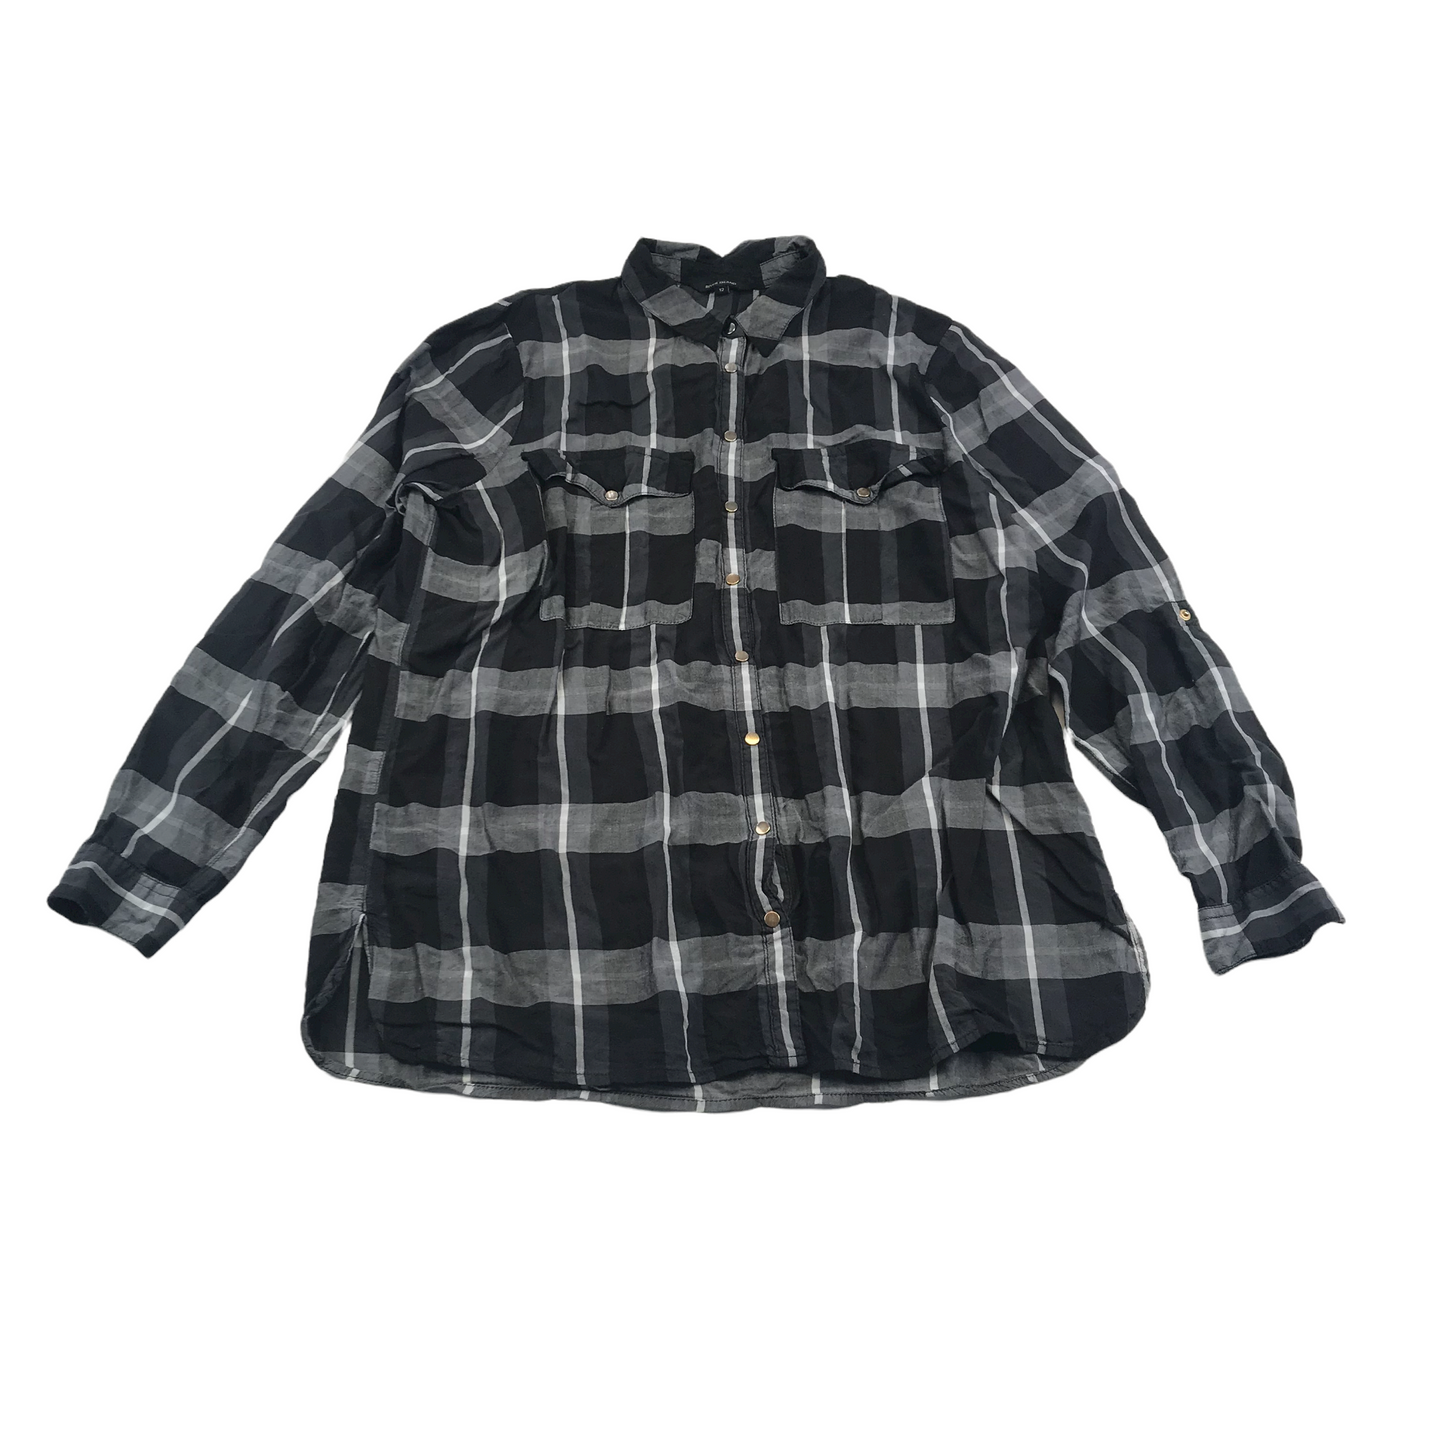 River Island Black and Grey Checked Shirt Women's Size 12